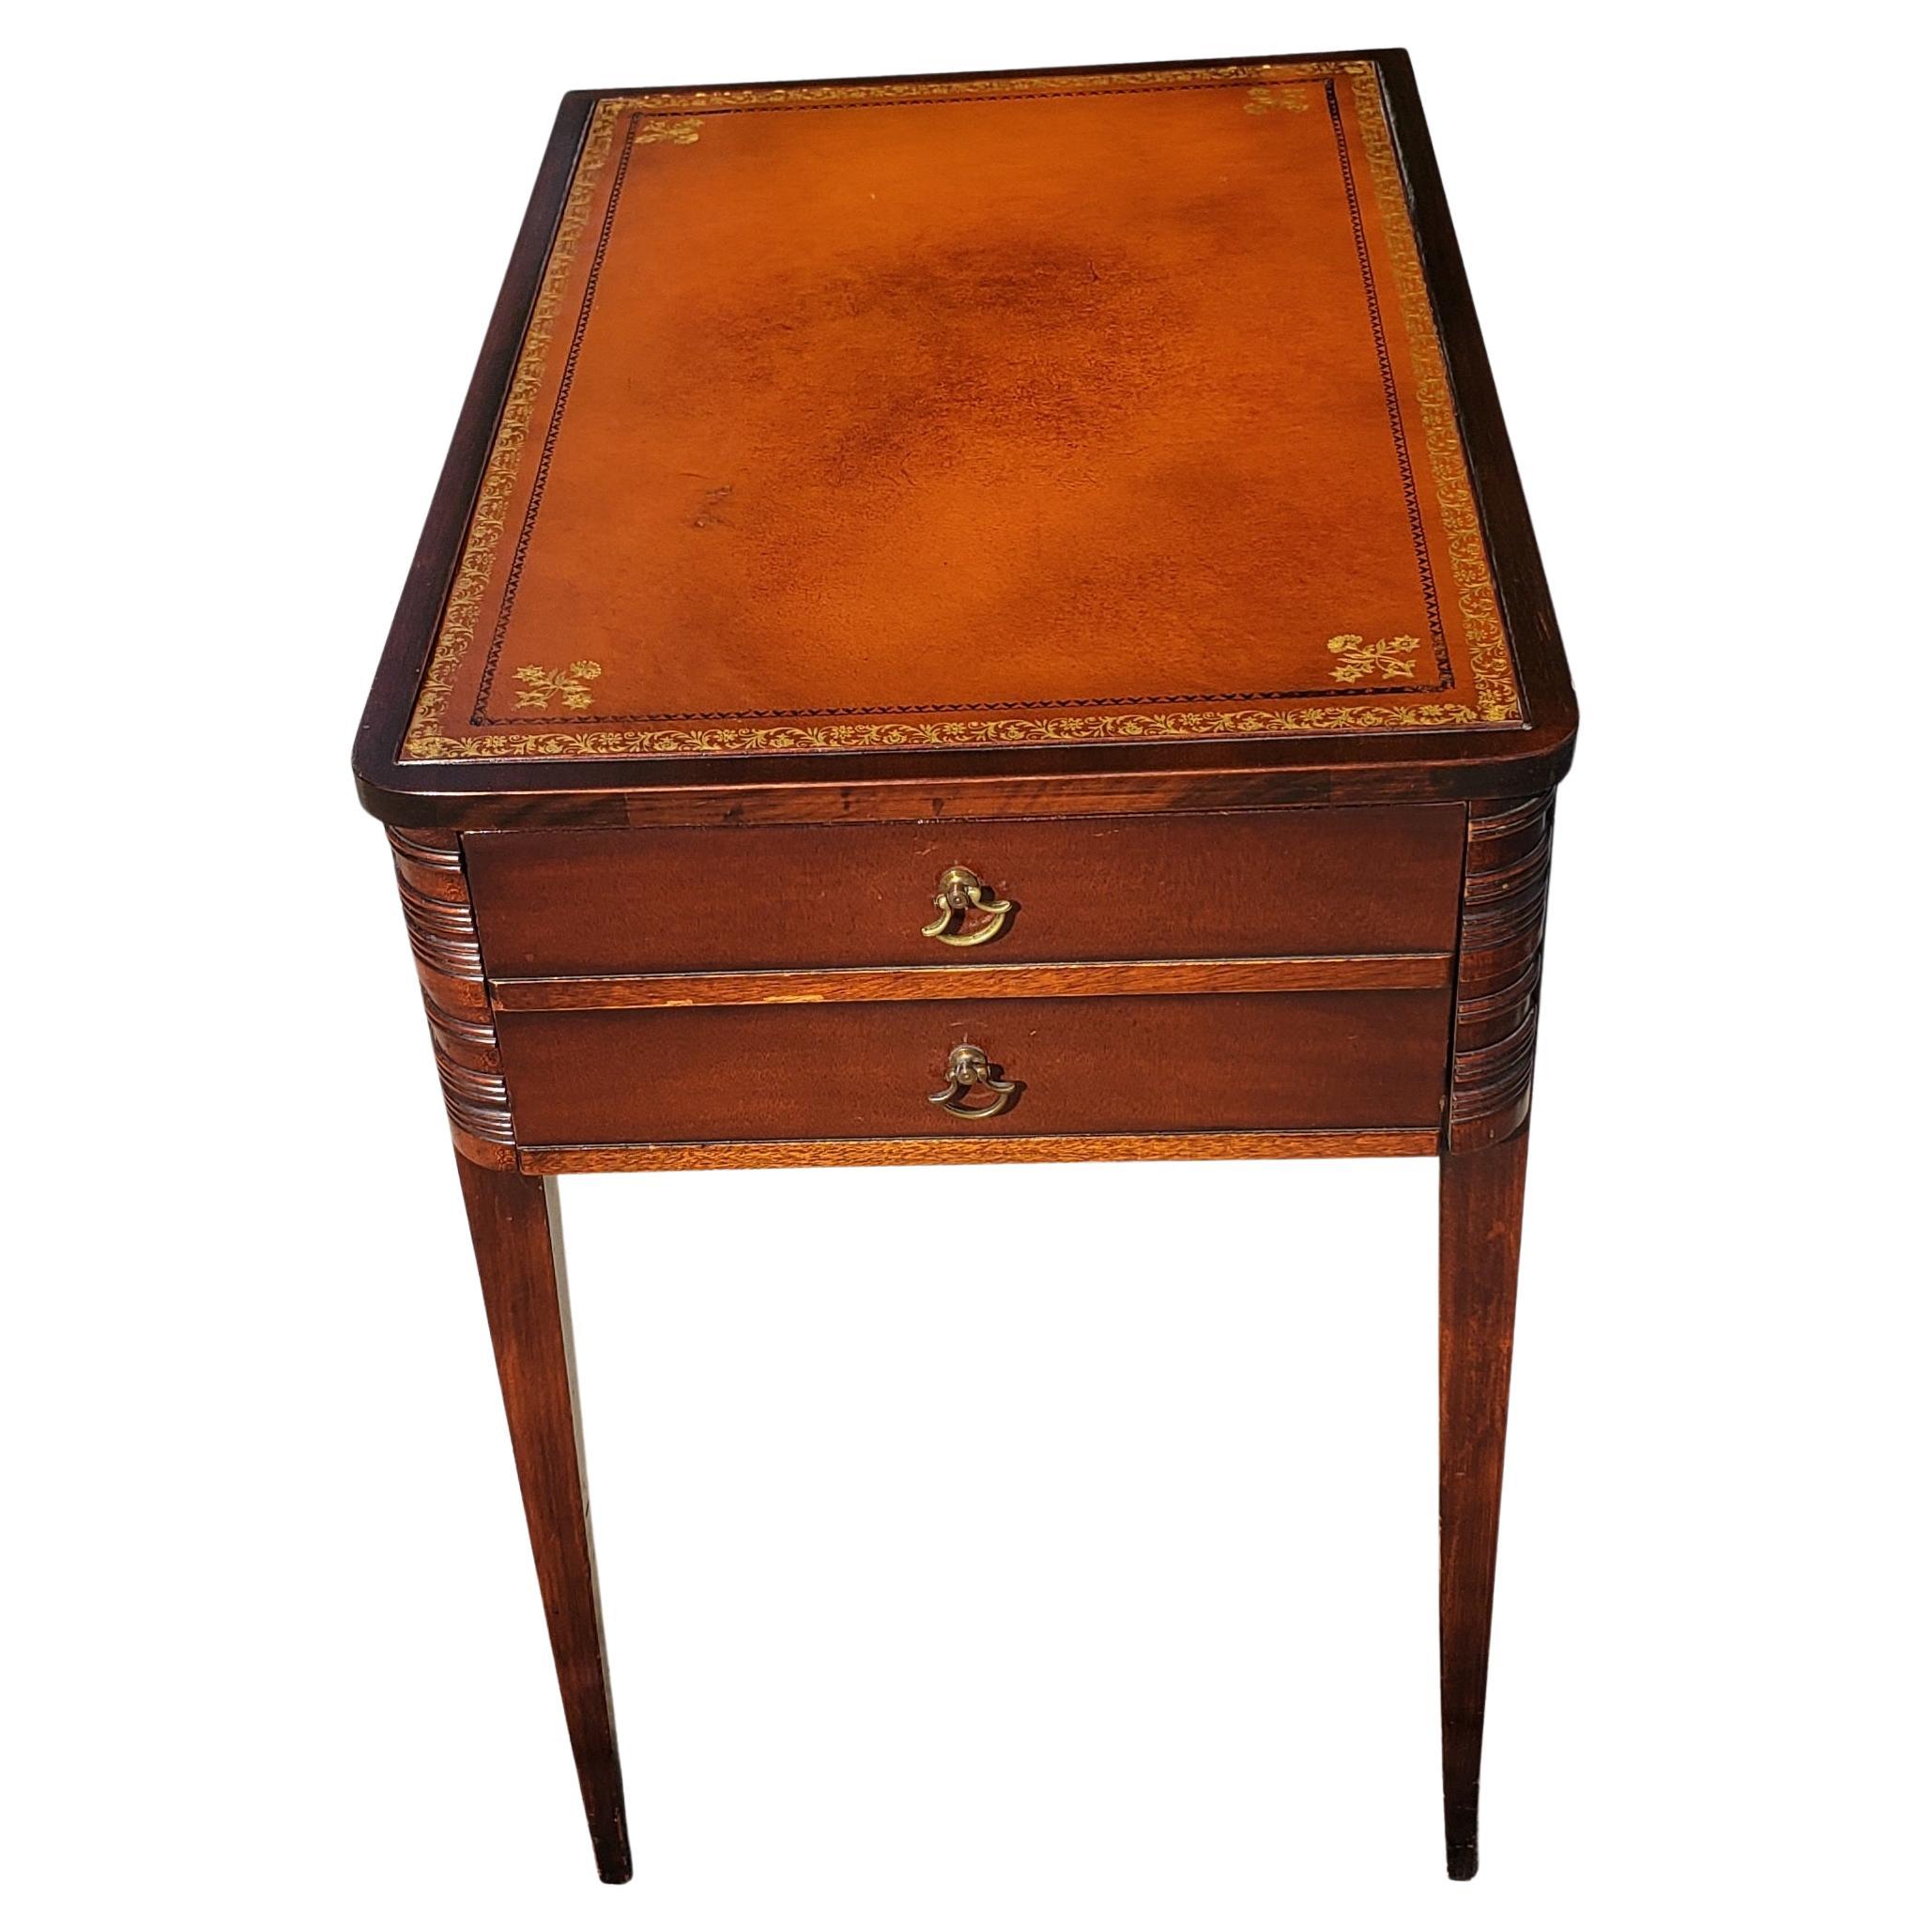 Beautiful American Regency side table. Mahogany wood. One large drawer with 2 drop pulls. Leather top with gold stenciling in good vintage condition.



W3L050122.